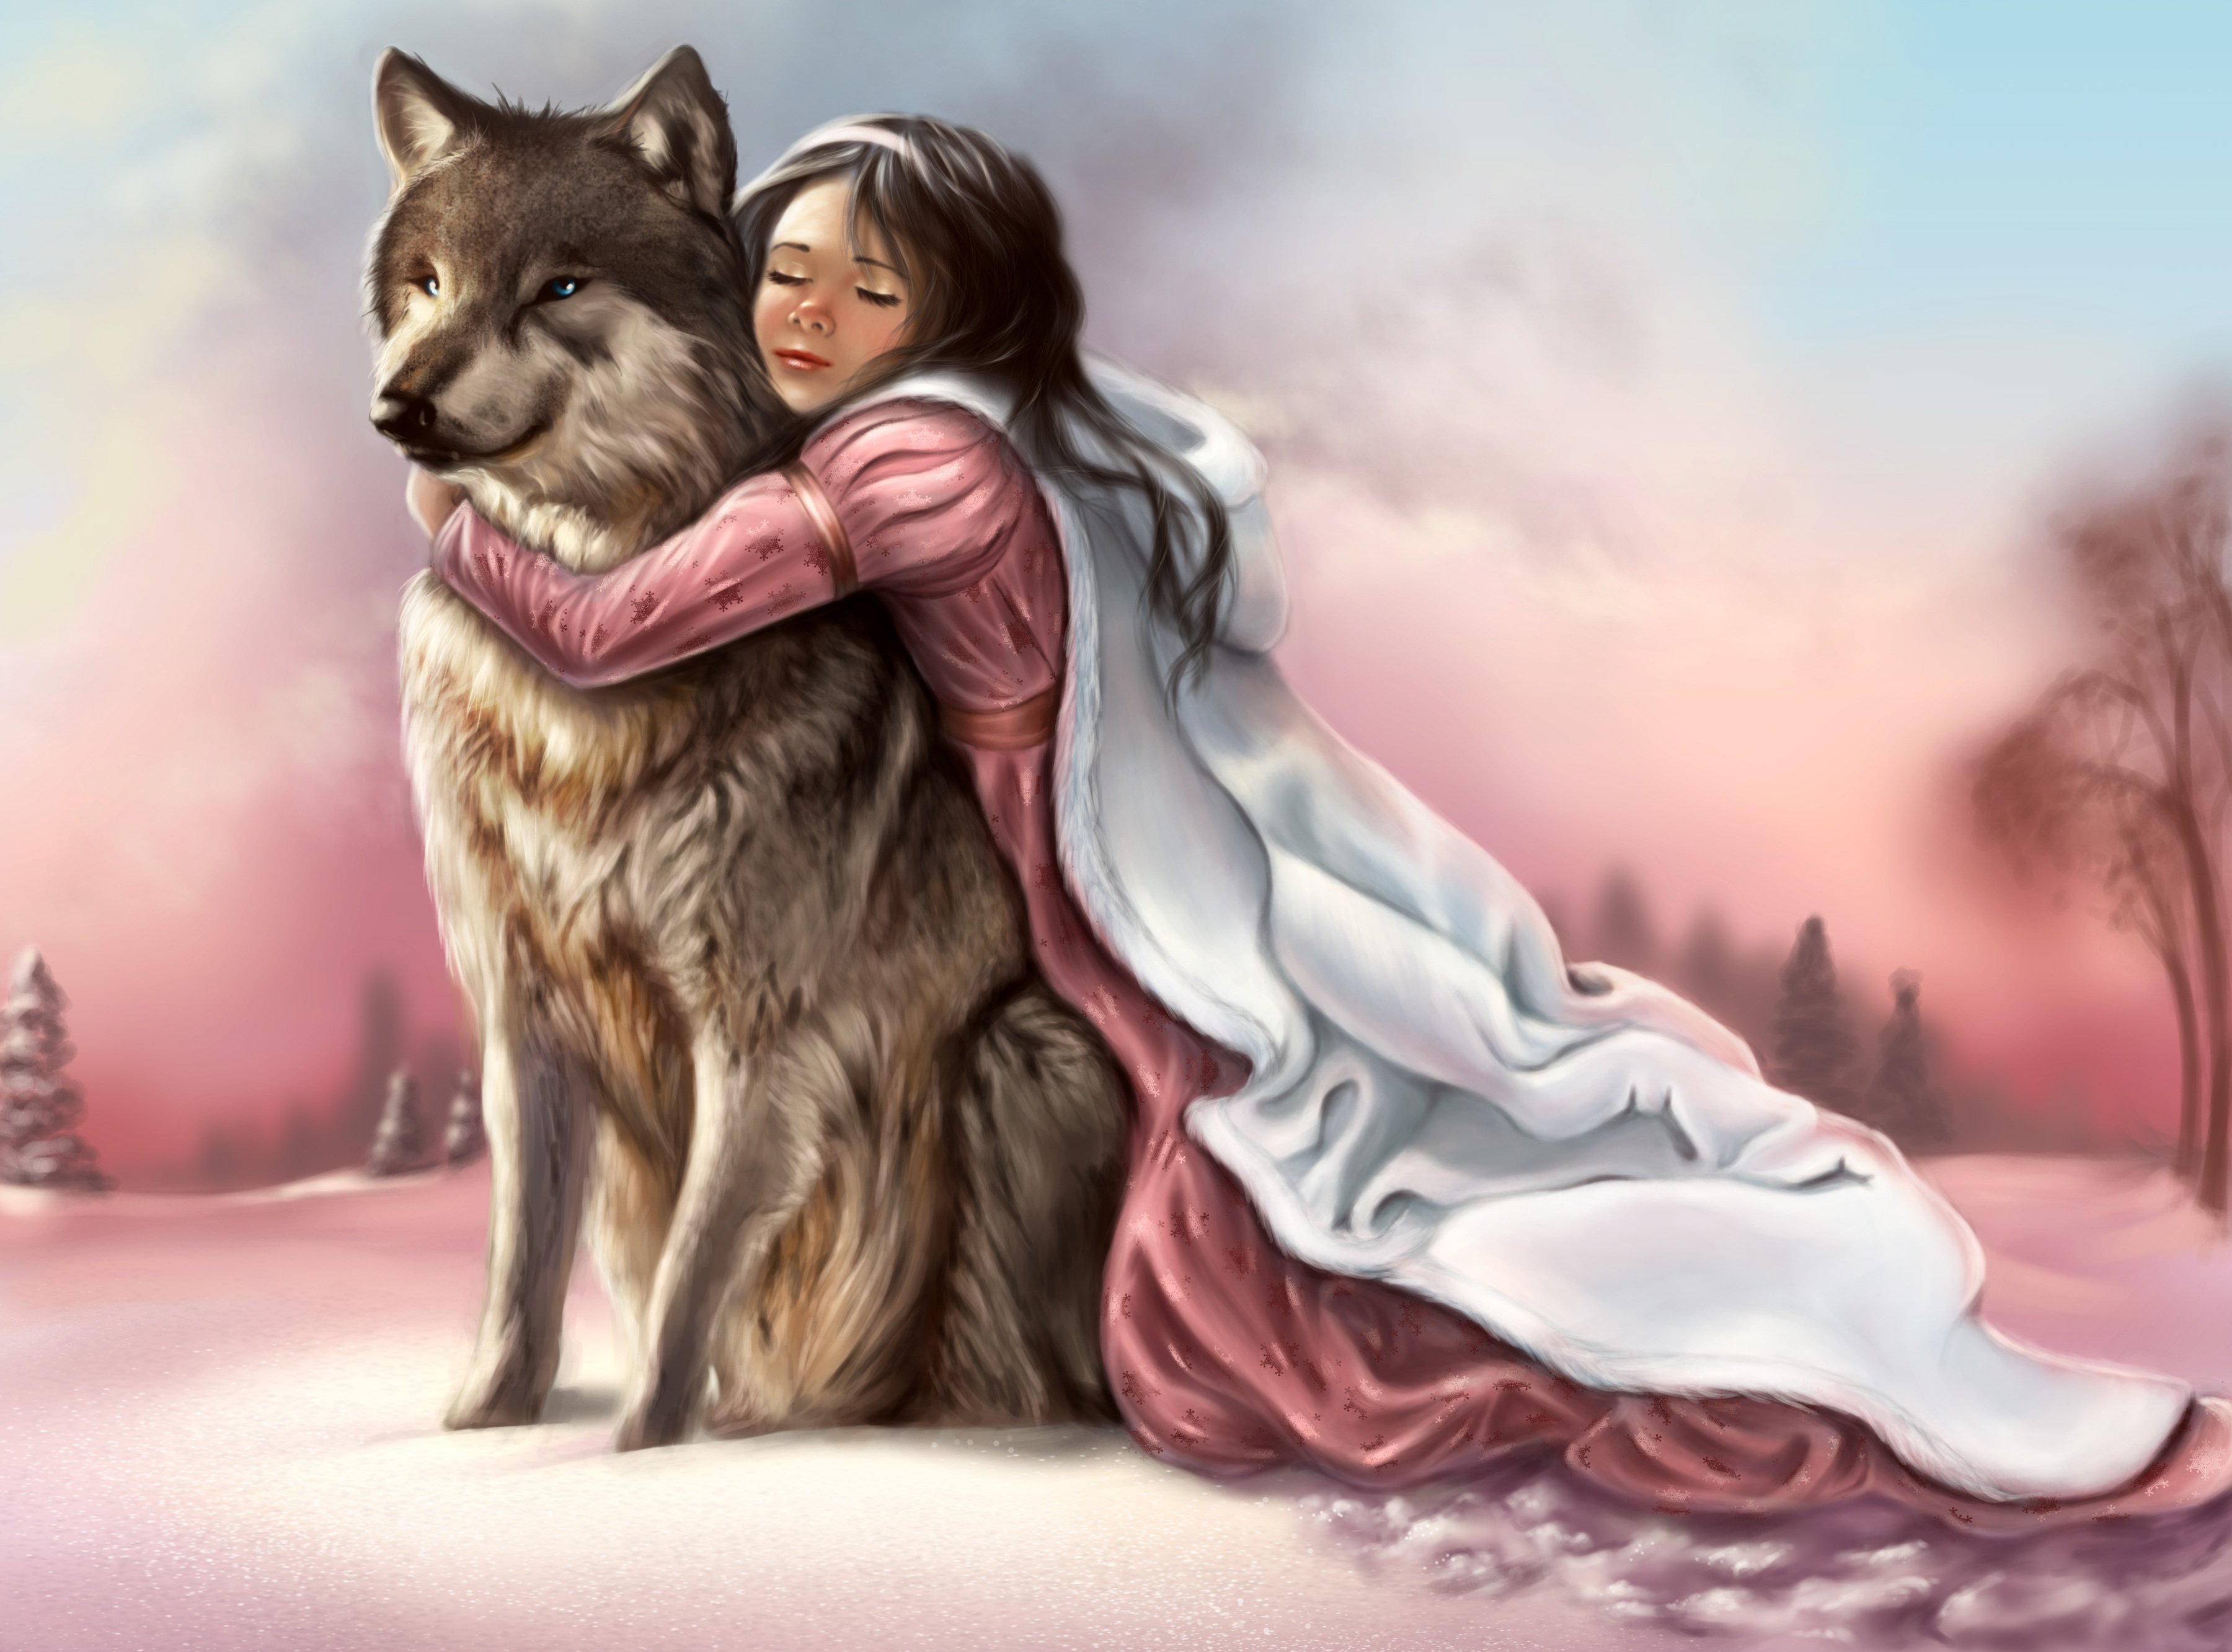 painting, Fantasy, Girl, Pink, Dress, Face, Eyes, Closed, Hands, Hugging, Wolf, Animal, Snow, Winter Wallpaper